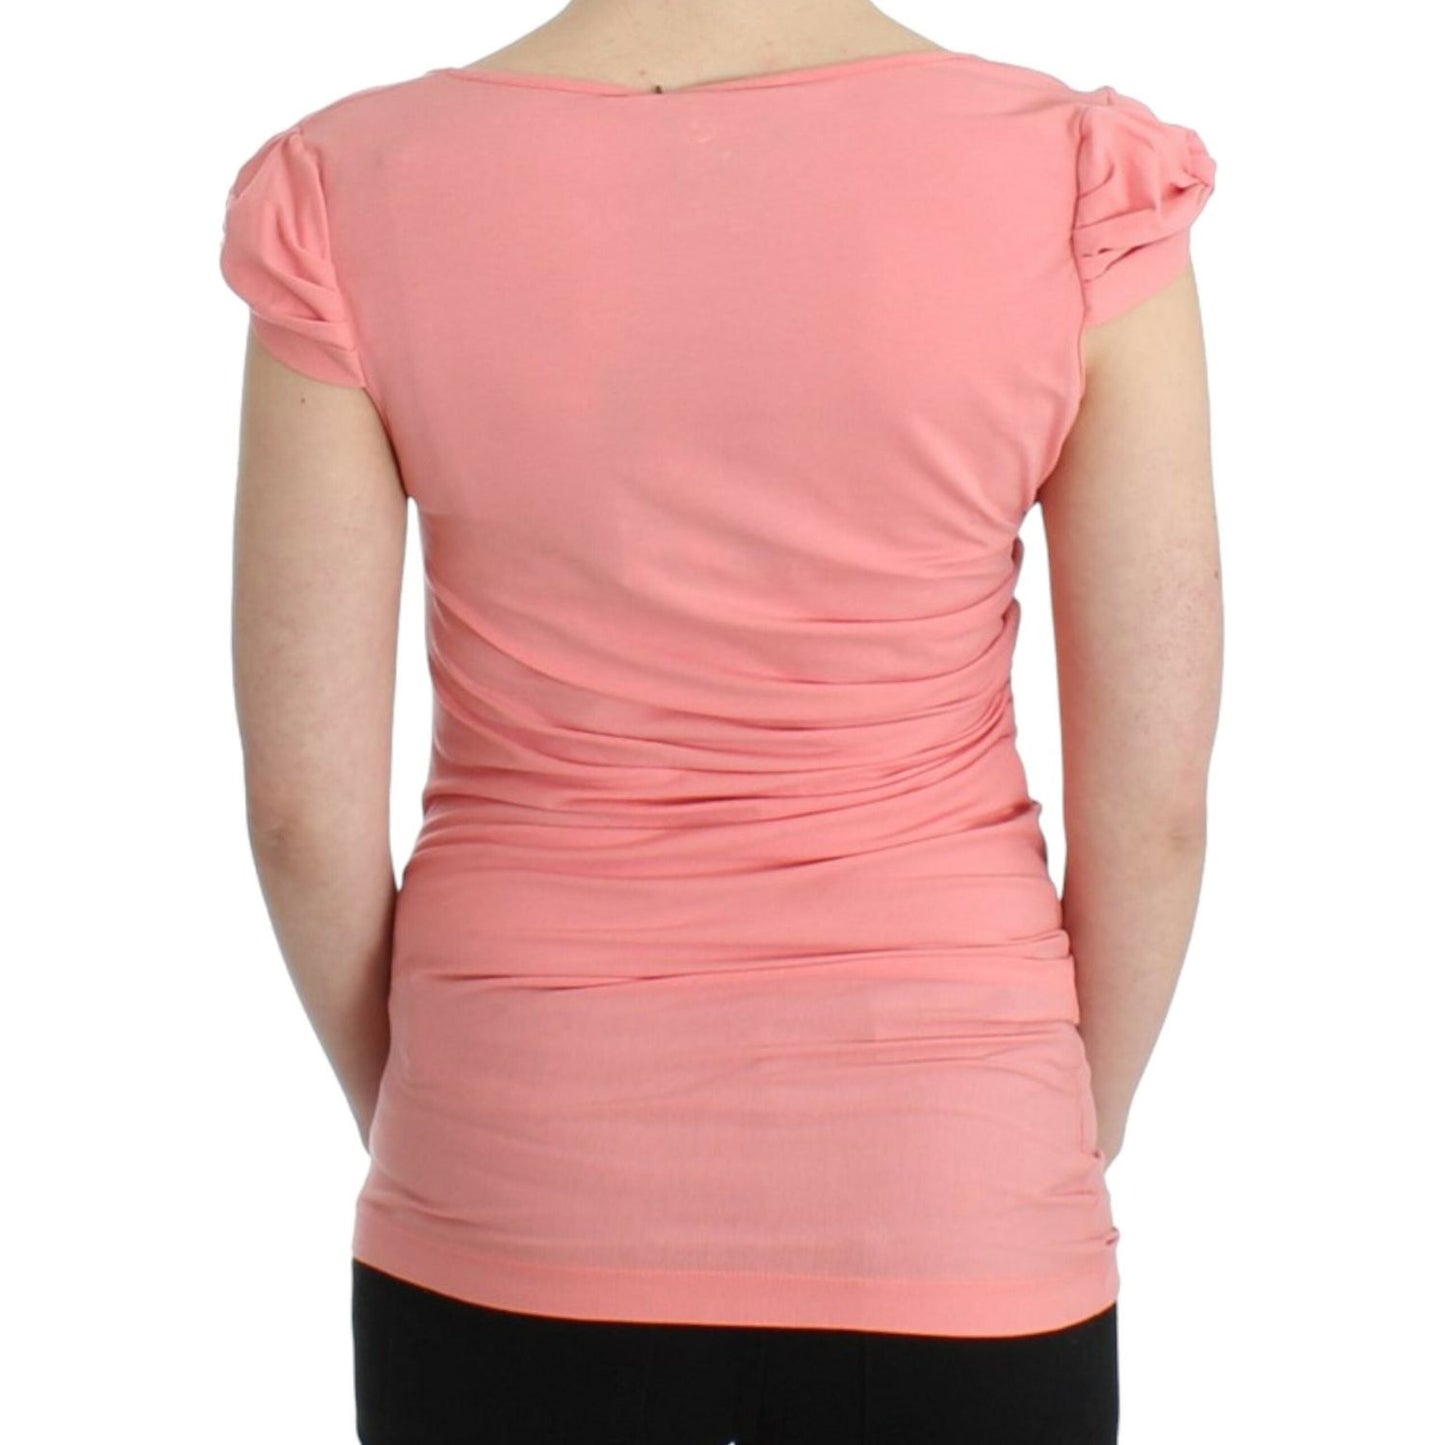 Cavalli Pink Cotton Blend Tank Top with Cap Sleeves pink-cotton-top